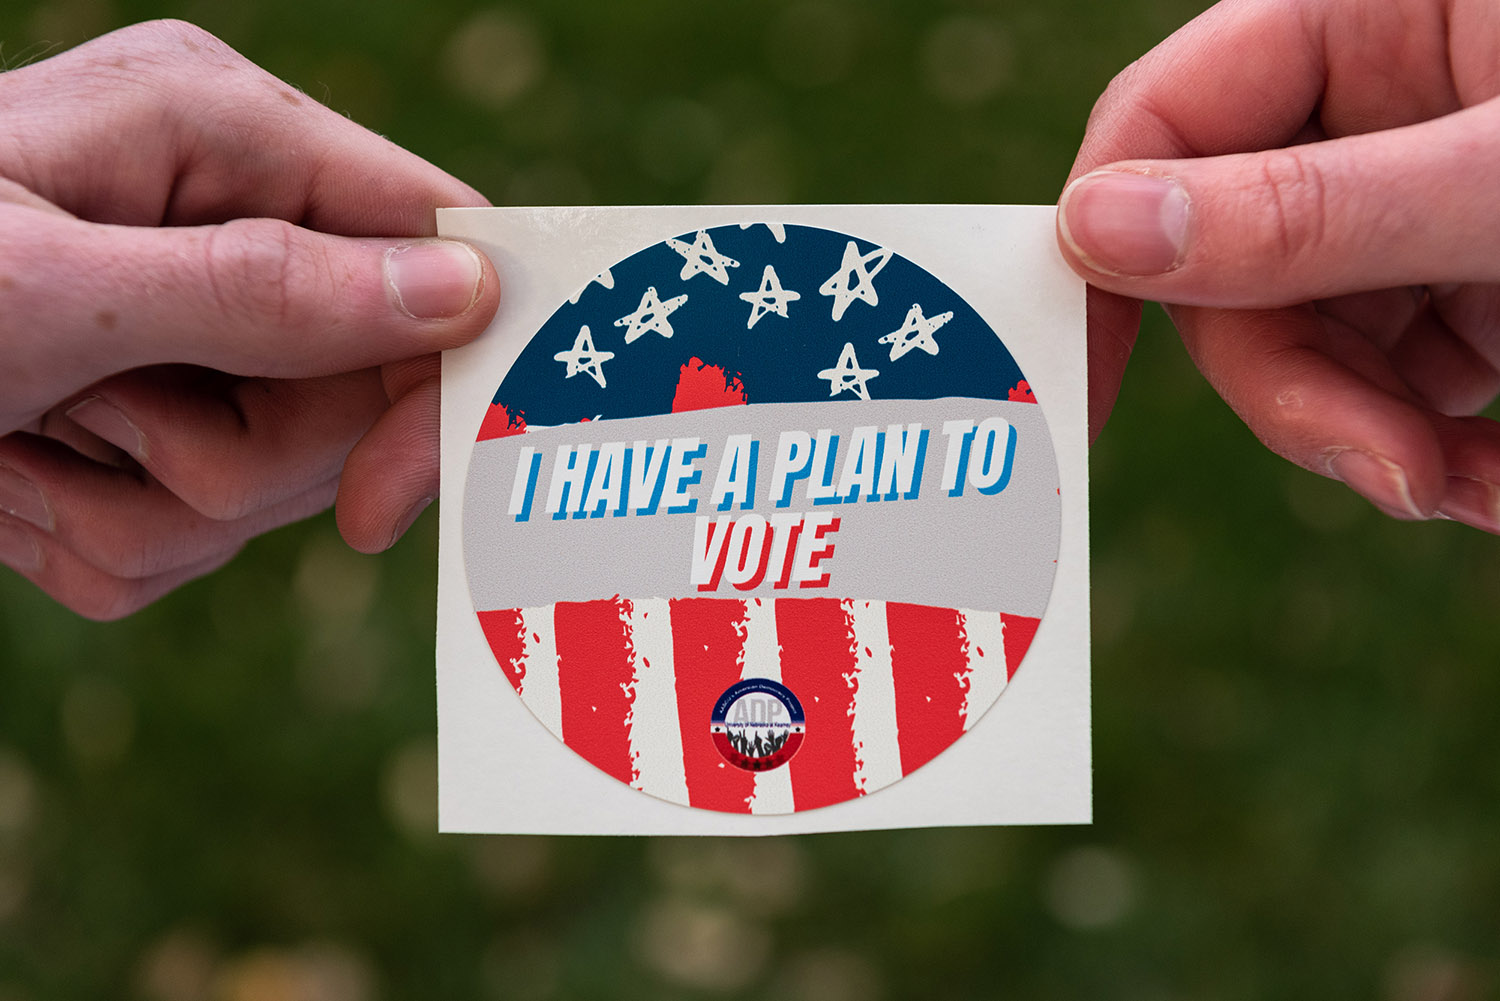 The American Democracy Project is encouraging UNK students to “have a plan to vote” during the upcoming election.